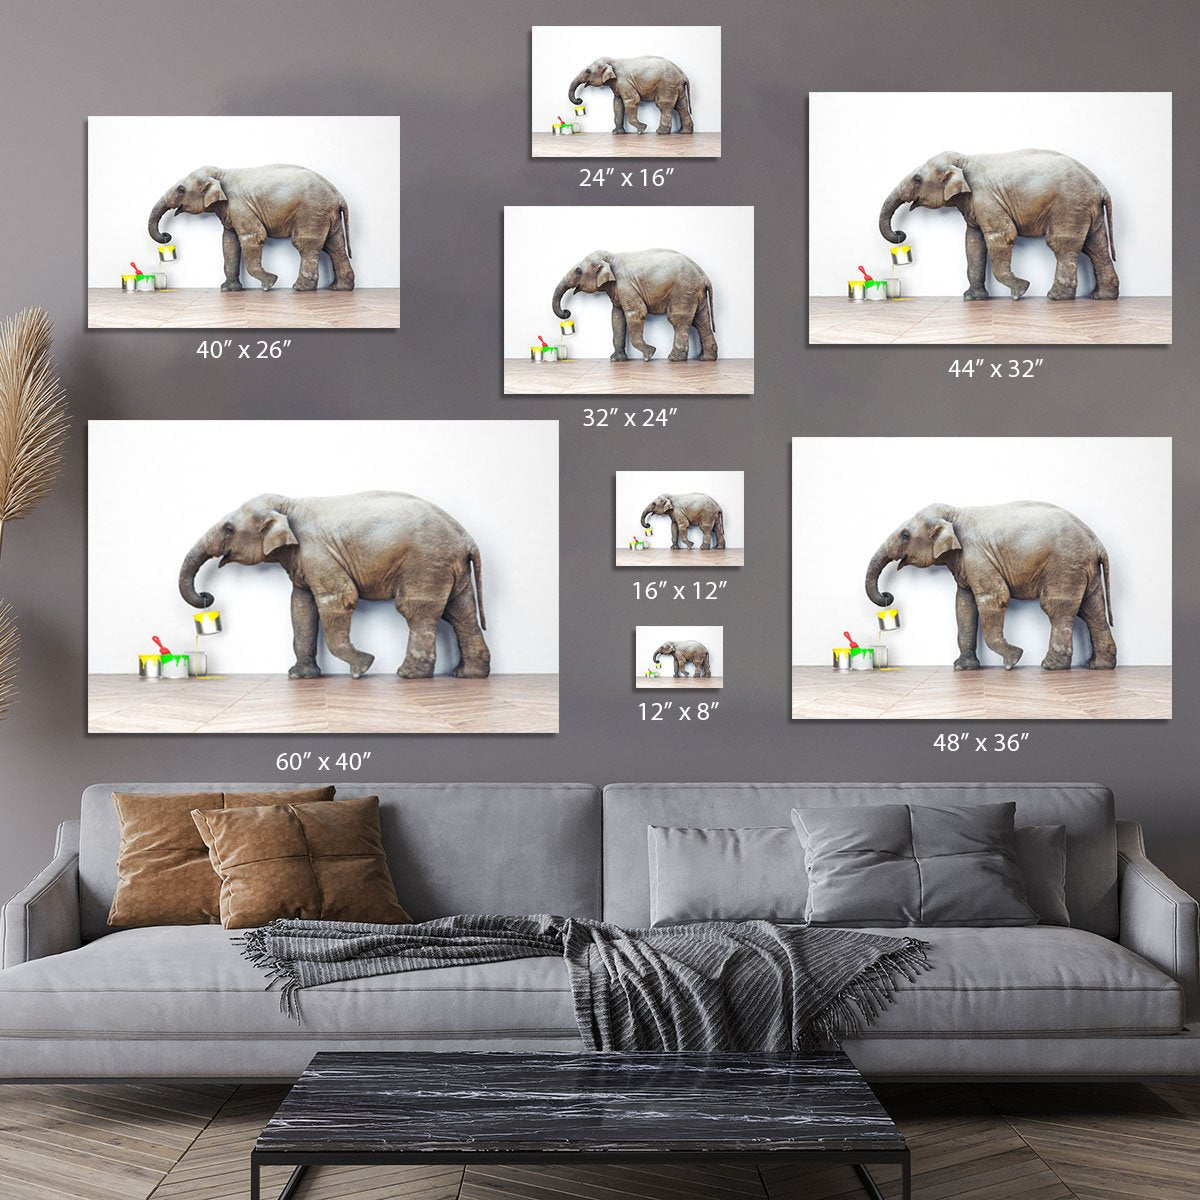 An elephant with paint cans Canvas Print or Poster